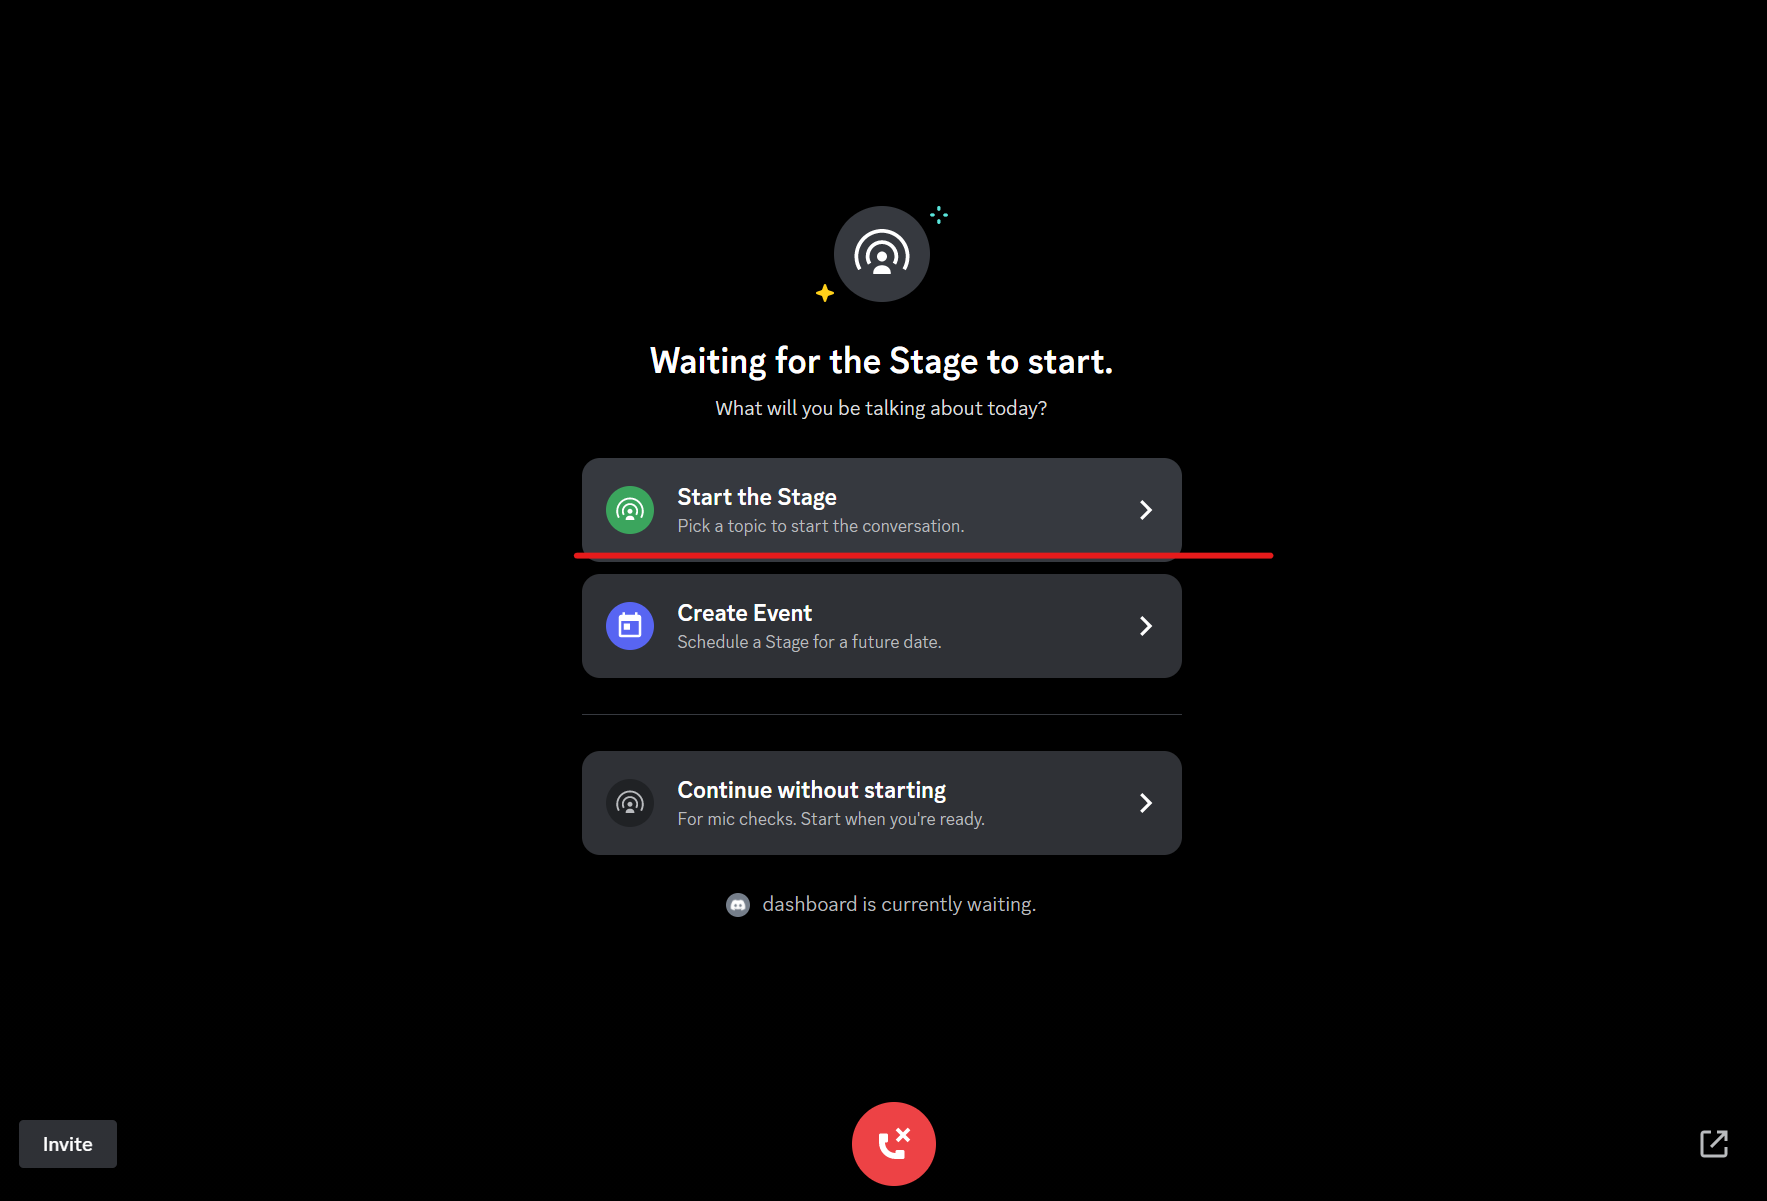 The option for starting stage